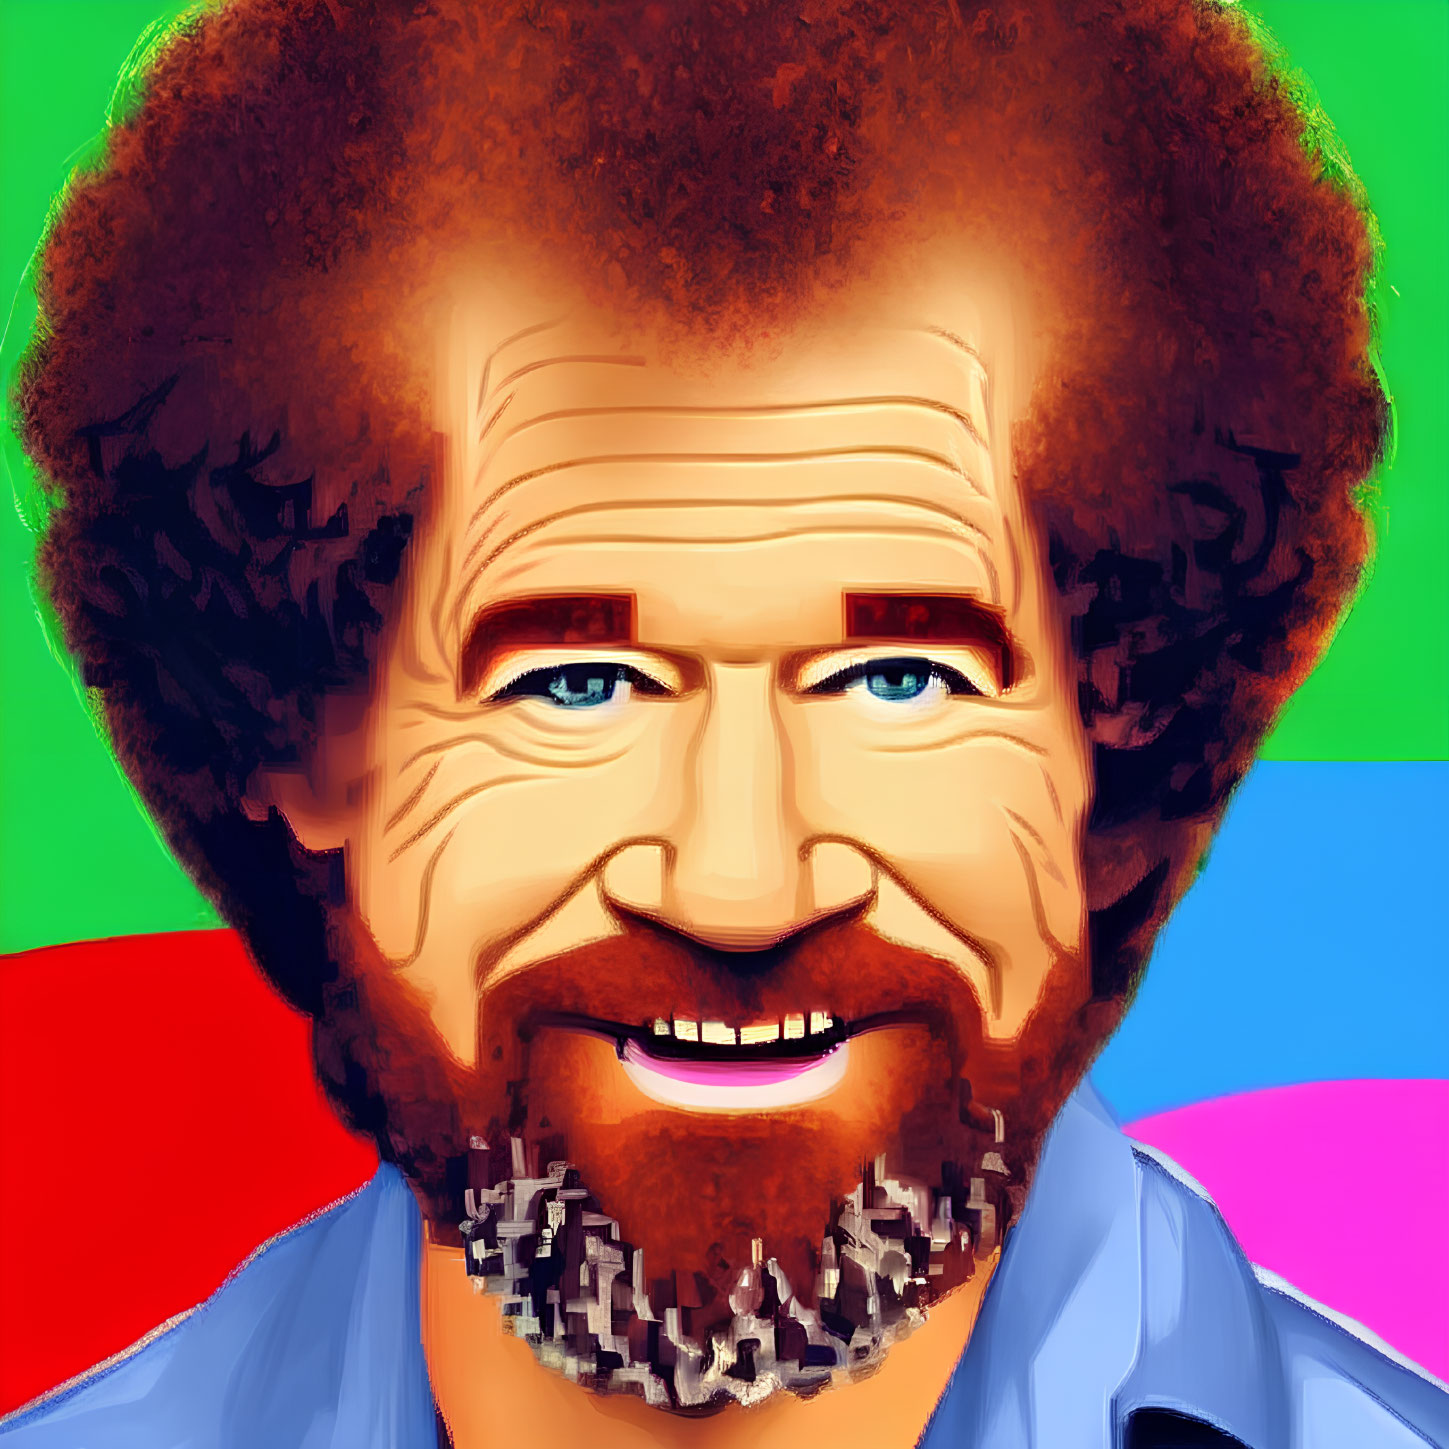 Colorful Pop Art Style Portrait of Smiling Man with Afro and Beard